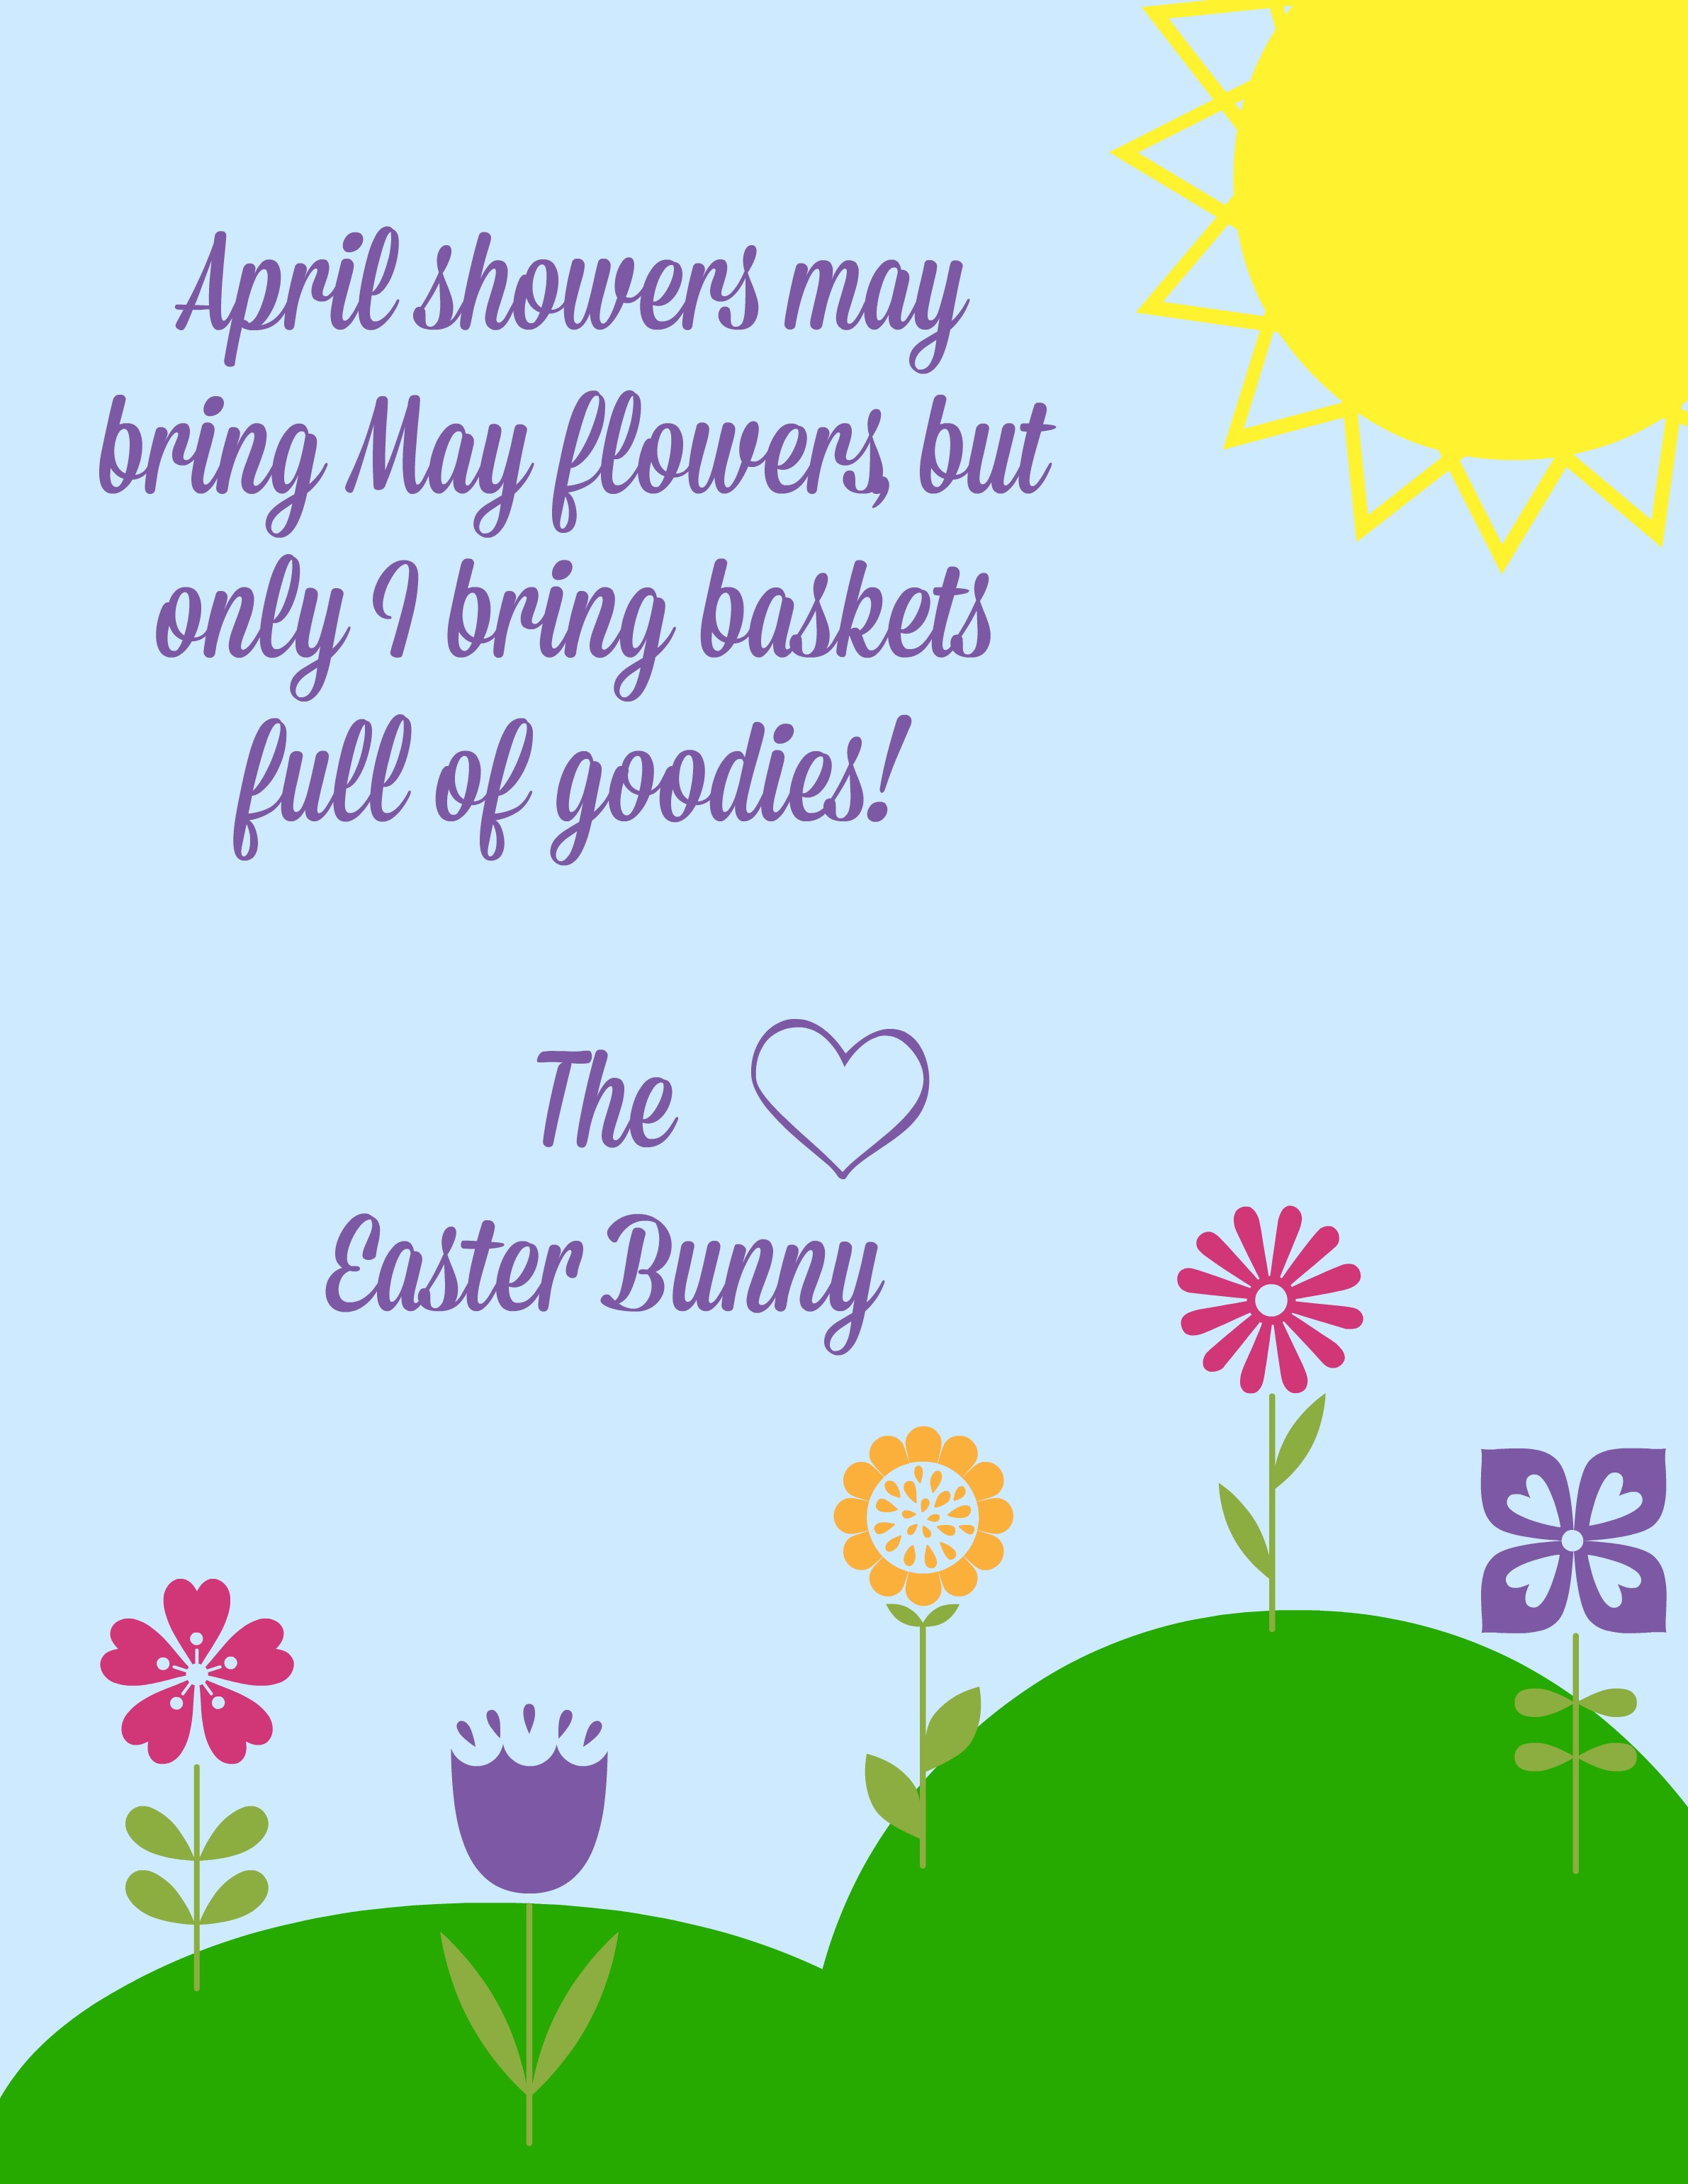 Free Printable Letters From The Easter Bunny